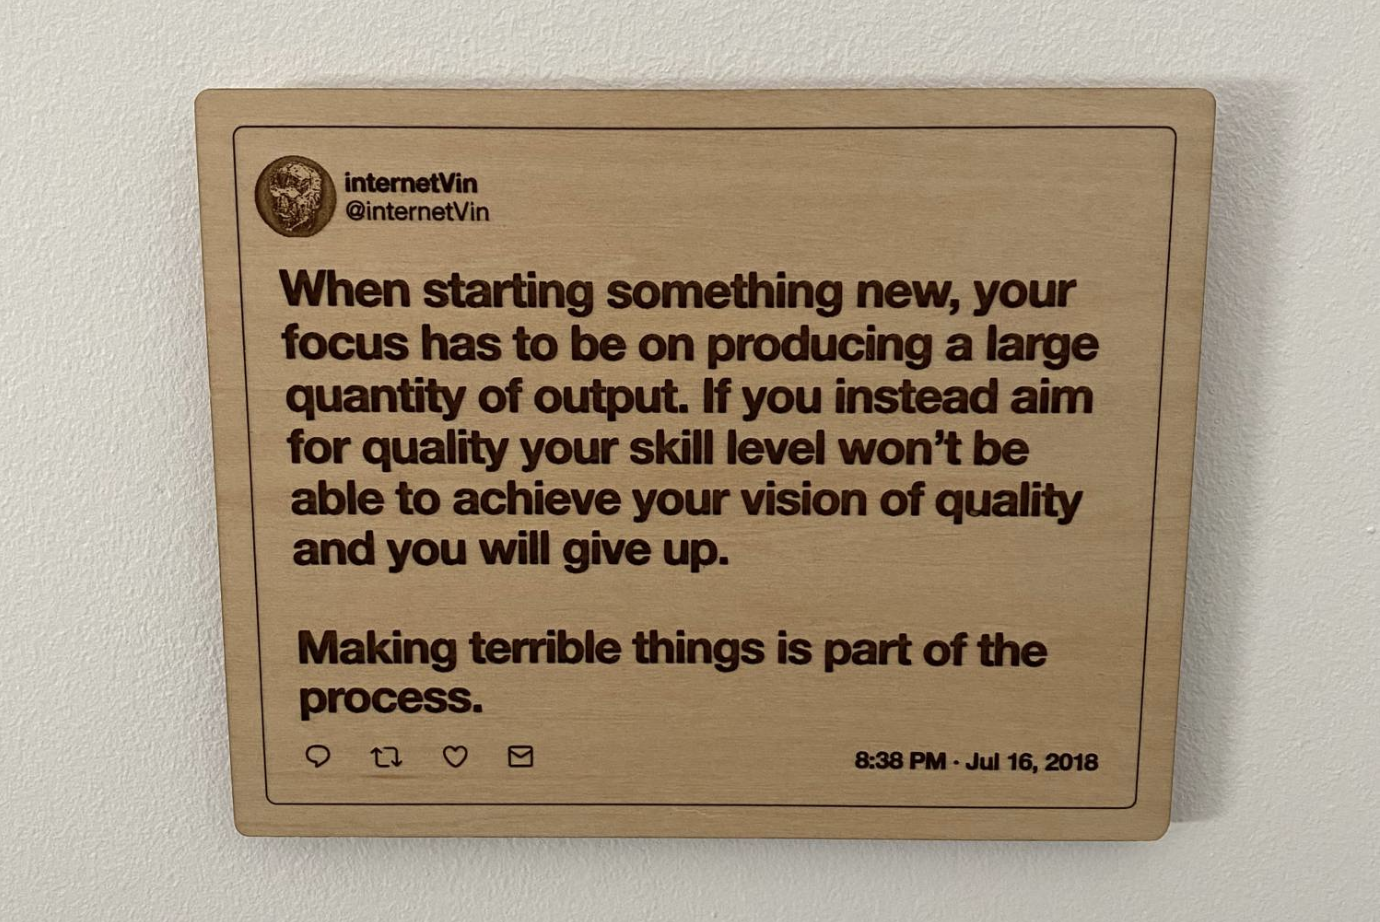 A quote by internetVin etched out in wood, saying: ’When starting something new, your focus has to be on producing a large quantity of output. If you instead aim for quality your skill level won’t be able to achieve your vision of quality and you will give up. Making terrible things is part of the process.’